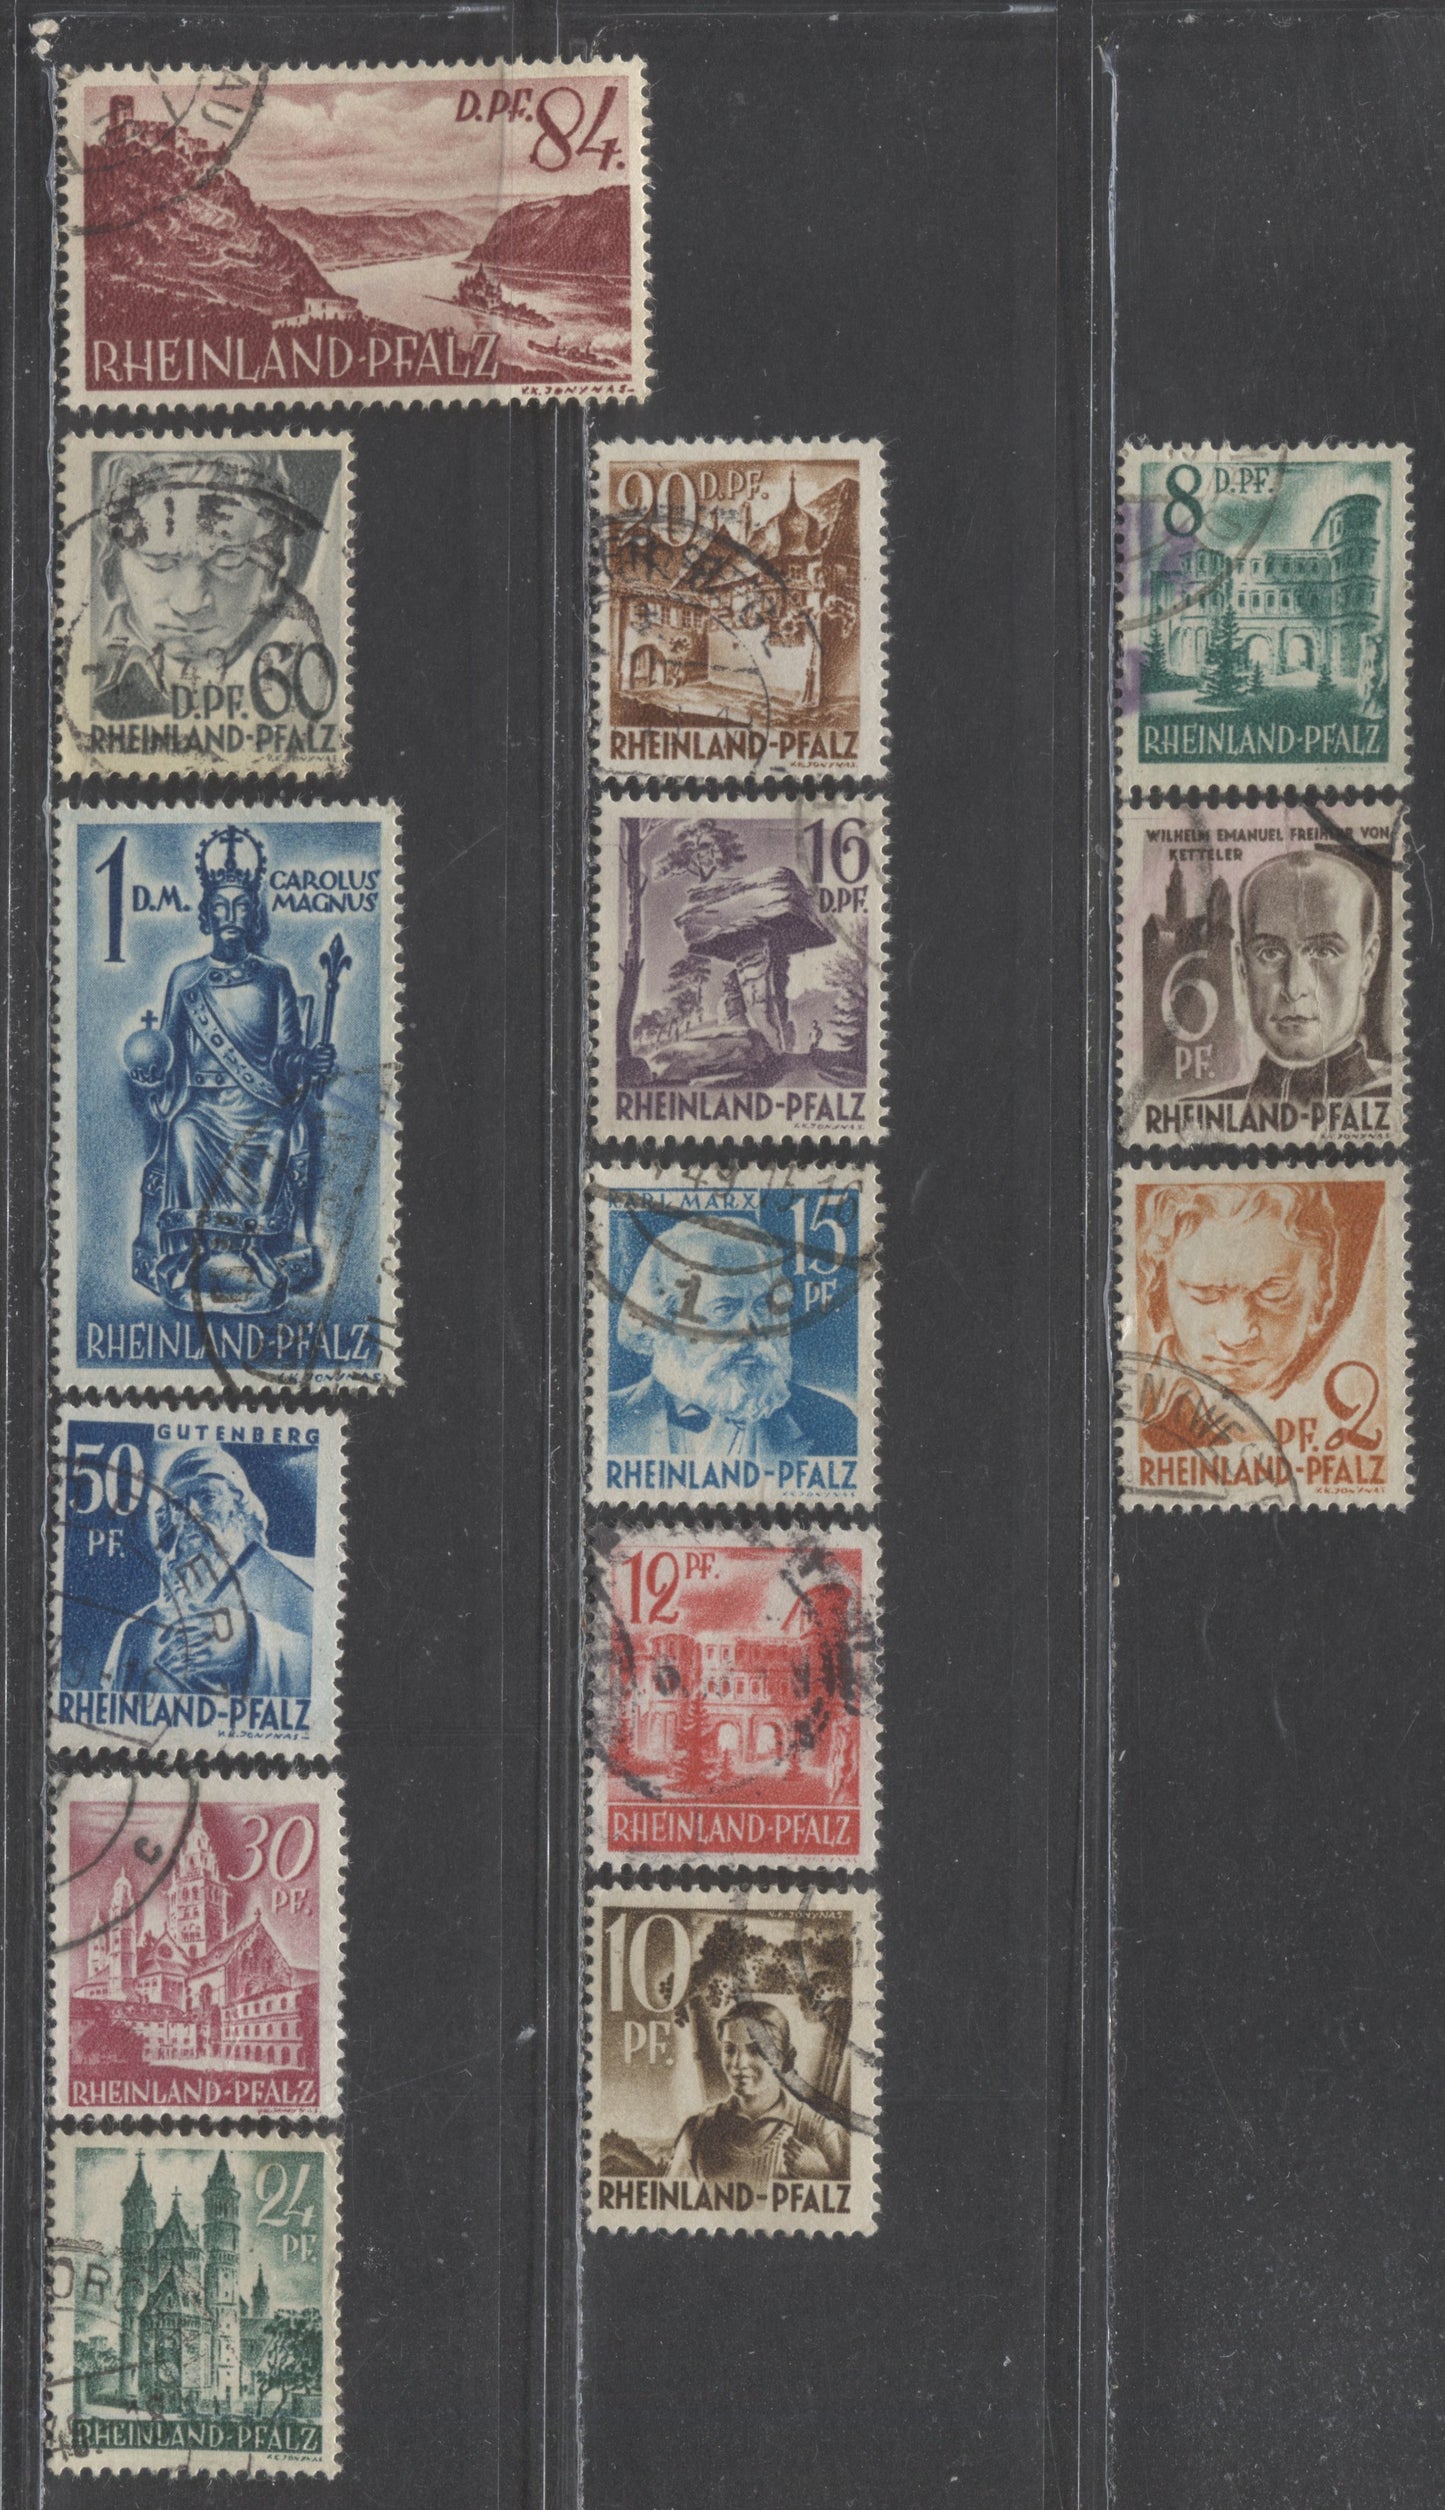 Lot 131A Germany - Rhineland - Pfalz SC#6N16/6N29 1948 Definitives, 14 Fine/Very Fine Used Singles, Click on Listing to See ALL Pictures, 2017 Scott Cat. $17.5 USD